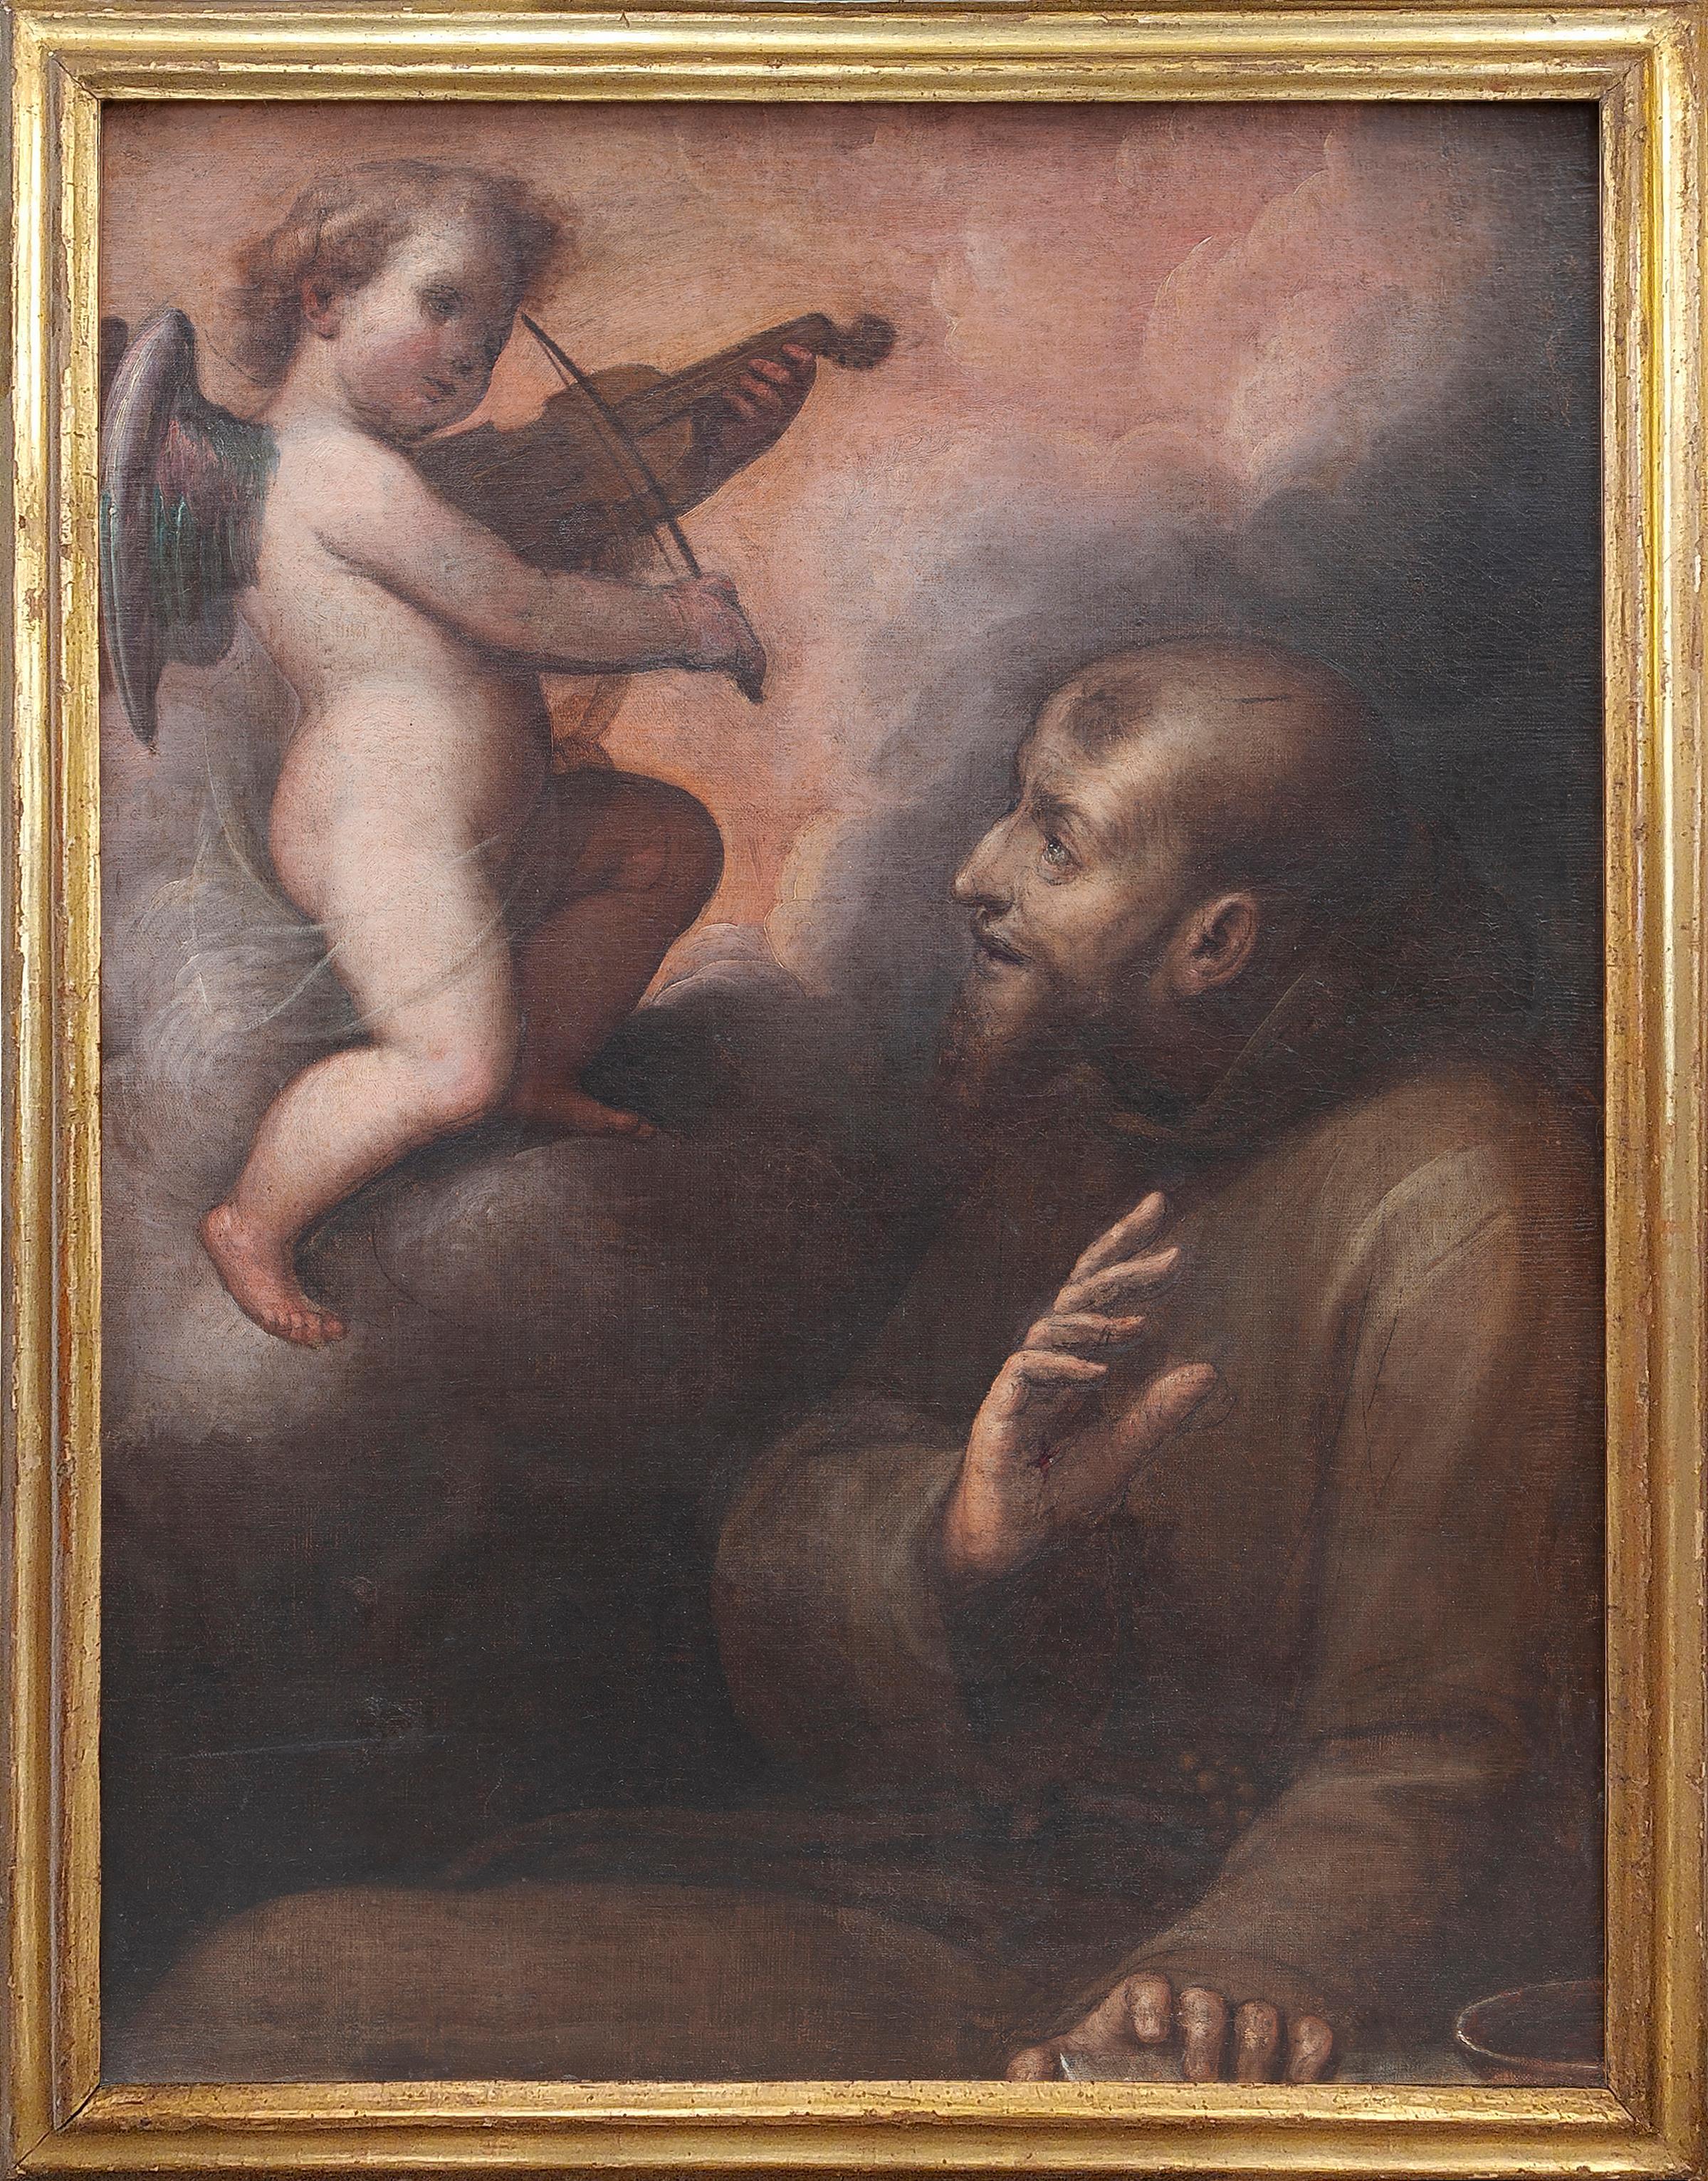 Saint Francis of Assisi comforted by an angel